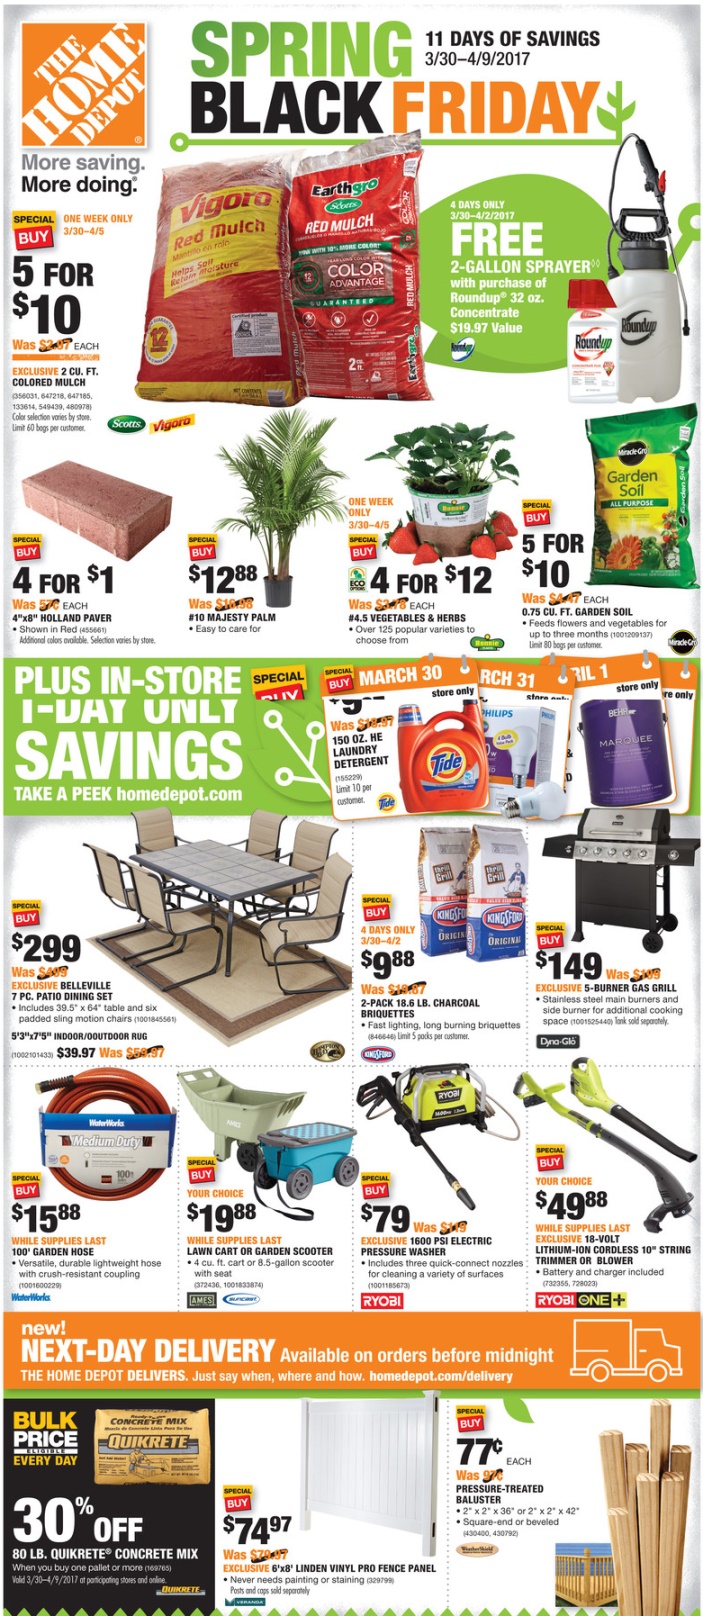 Home Depot Spring Black Friday 2017 Ads, Deals and Sales